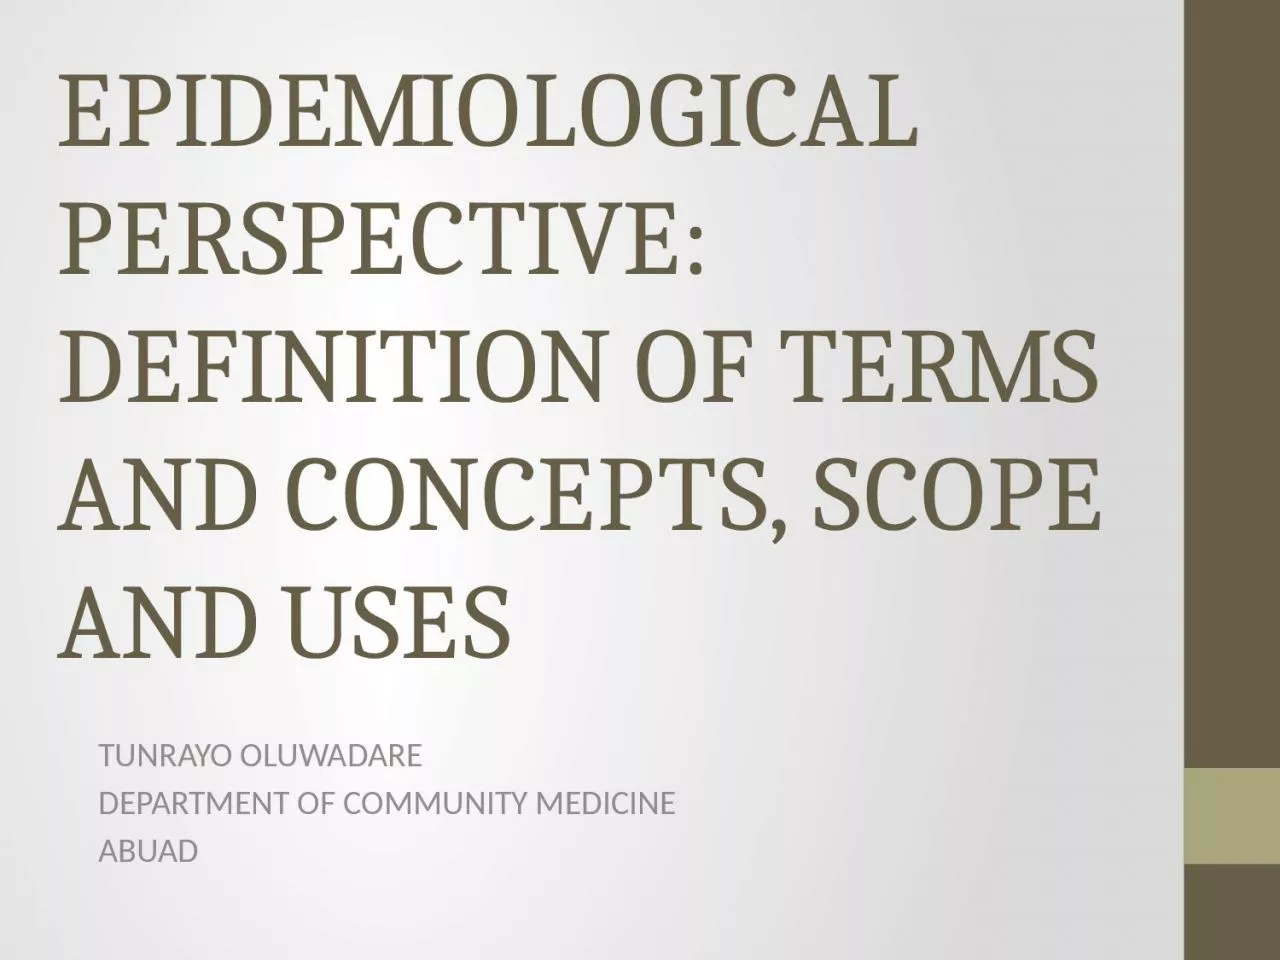 EPIDEMIOLOGICAL PERSPECTIVE: DEFINITION OF TERMS AND CONCEPTS, SCOPE AND USES